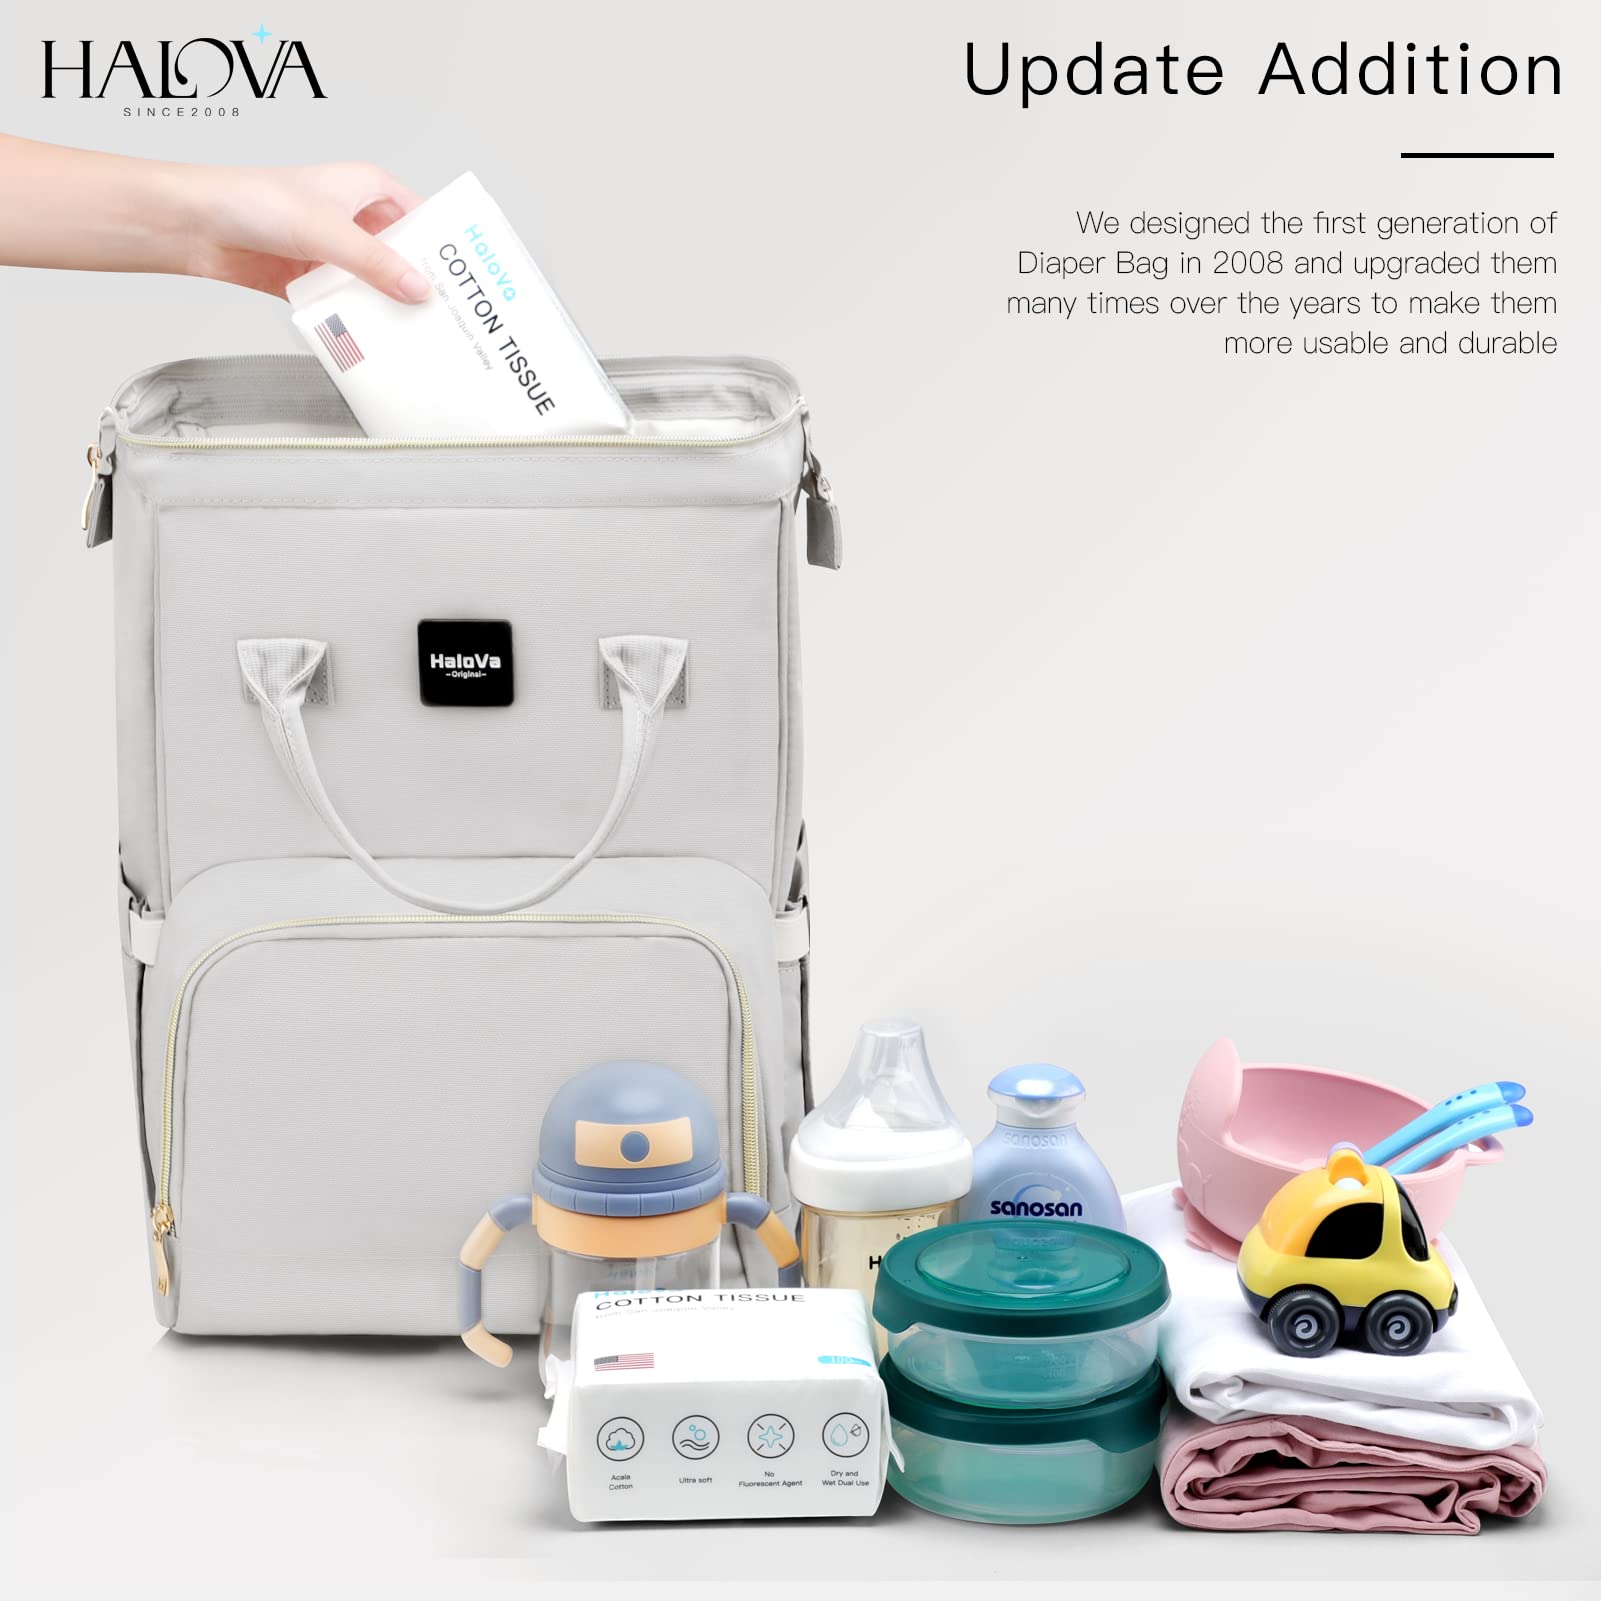 HaloVa Diaper Bag Multi-Function Waterproof Travel Backpack Nappy Bags for Baby Care, Large Capacity, Stylish and Durable, Greyish